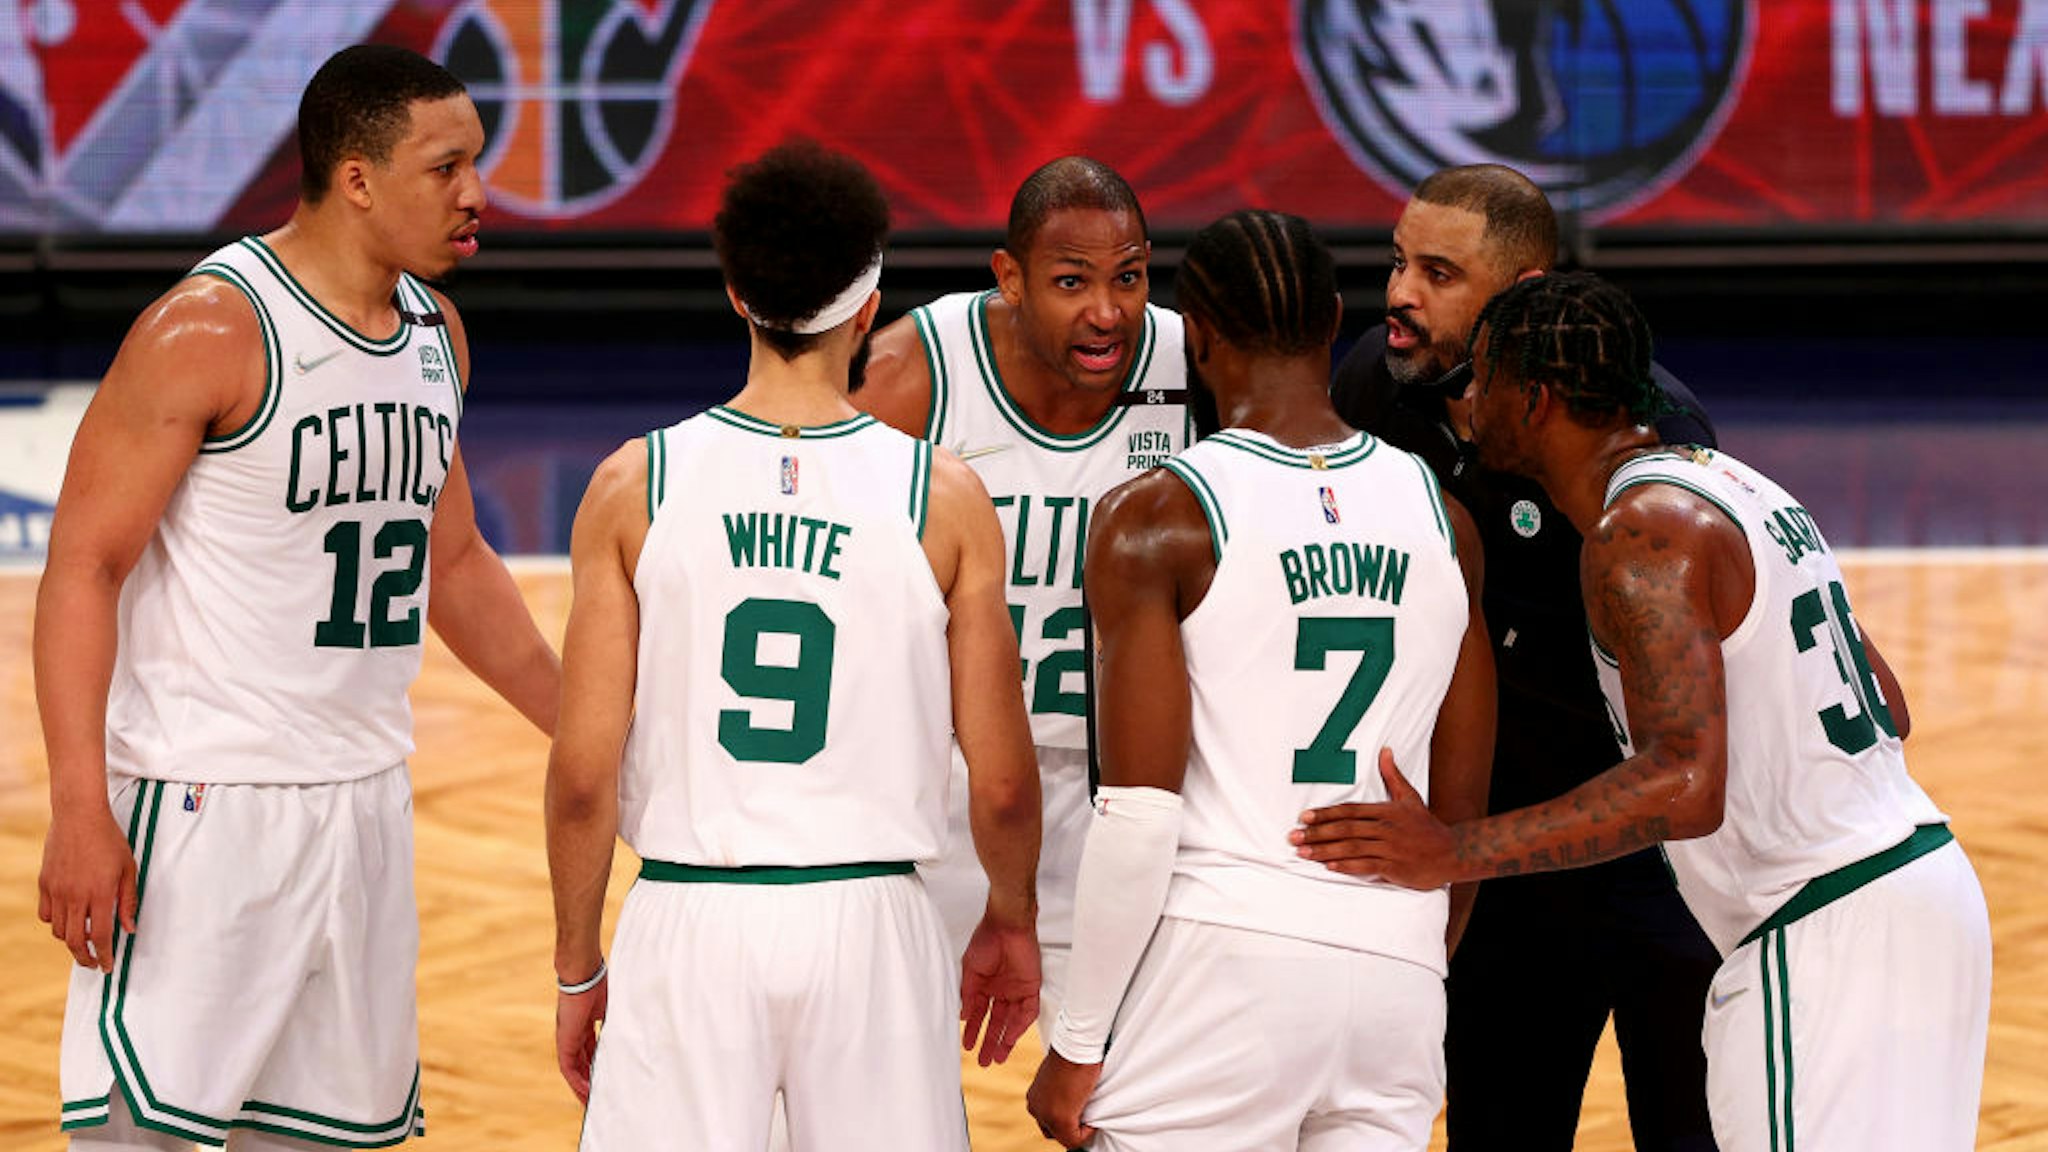 NEW YORK, NEW YORK - APRIL 25: Grant Williams #12,Derrick White #9,Al Horford #42, Jaylen Brown #7, Marcus Smart #36 and head coach Ime Udoka of the Boston Celtics huddle in the final minutes during Game Four of the Eastern Conference First Round Playoffs against the Boston Celtics at Barclays Center on April 25, 2022 in the Brooklyn borough of New York City. The Boston Celtics defeated the Brooklyn Nets 116-112. NOTE TO USER: User expressly acknowledges and agrees that, by downloading and or using this photograph, User is consenting to the terms and conditions of the Getty Images License Agreement. (Photo by Elsa/Getty Images)